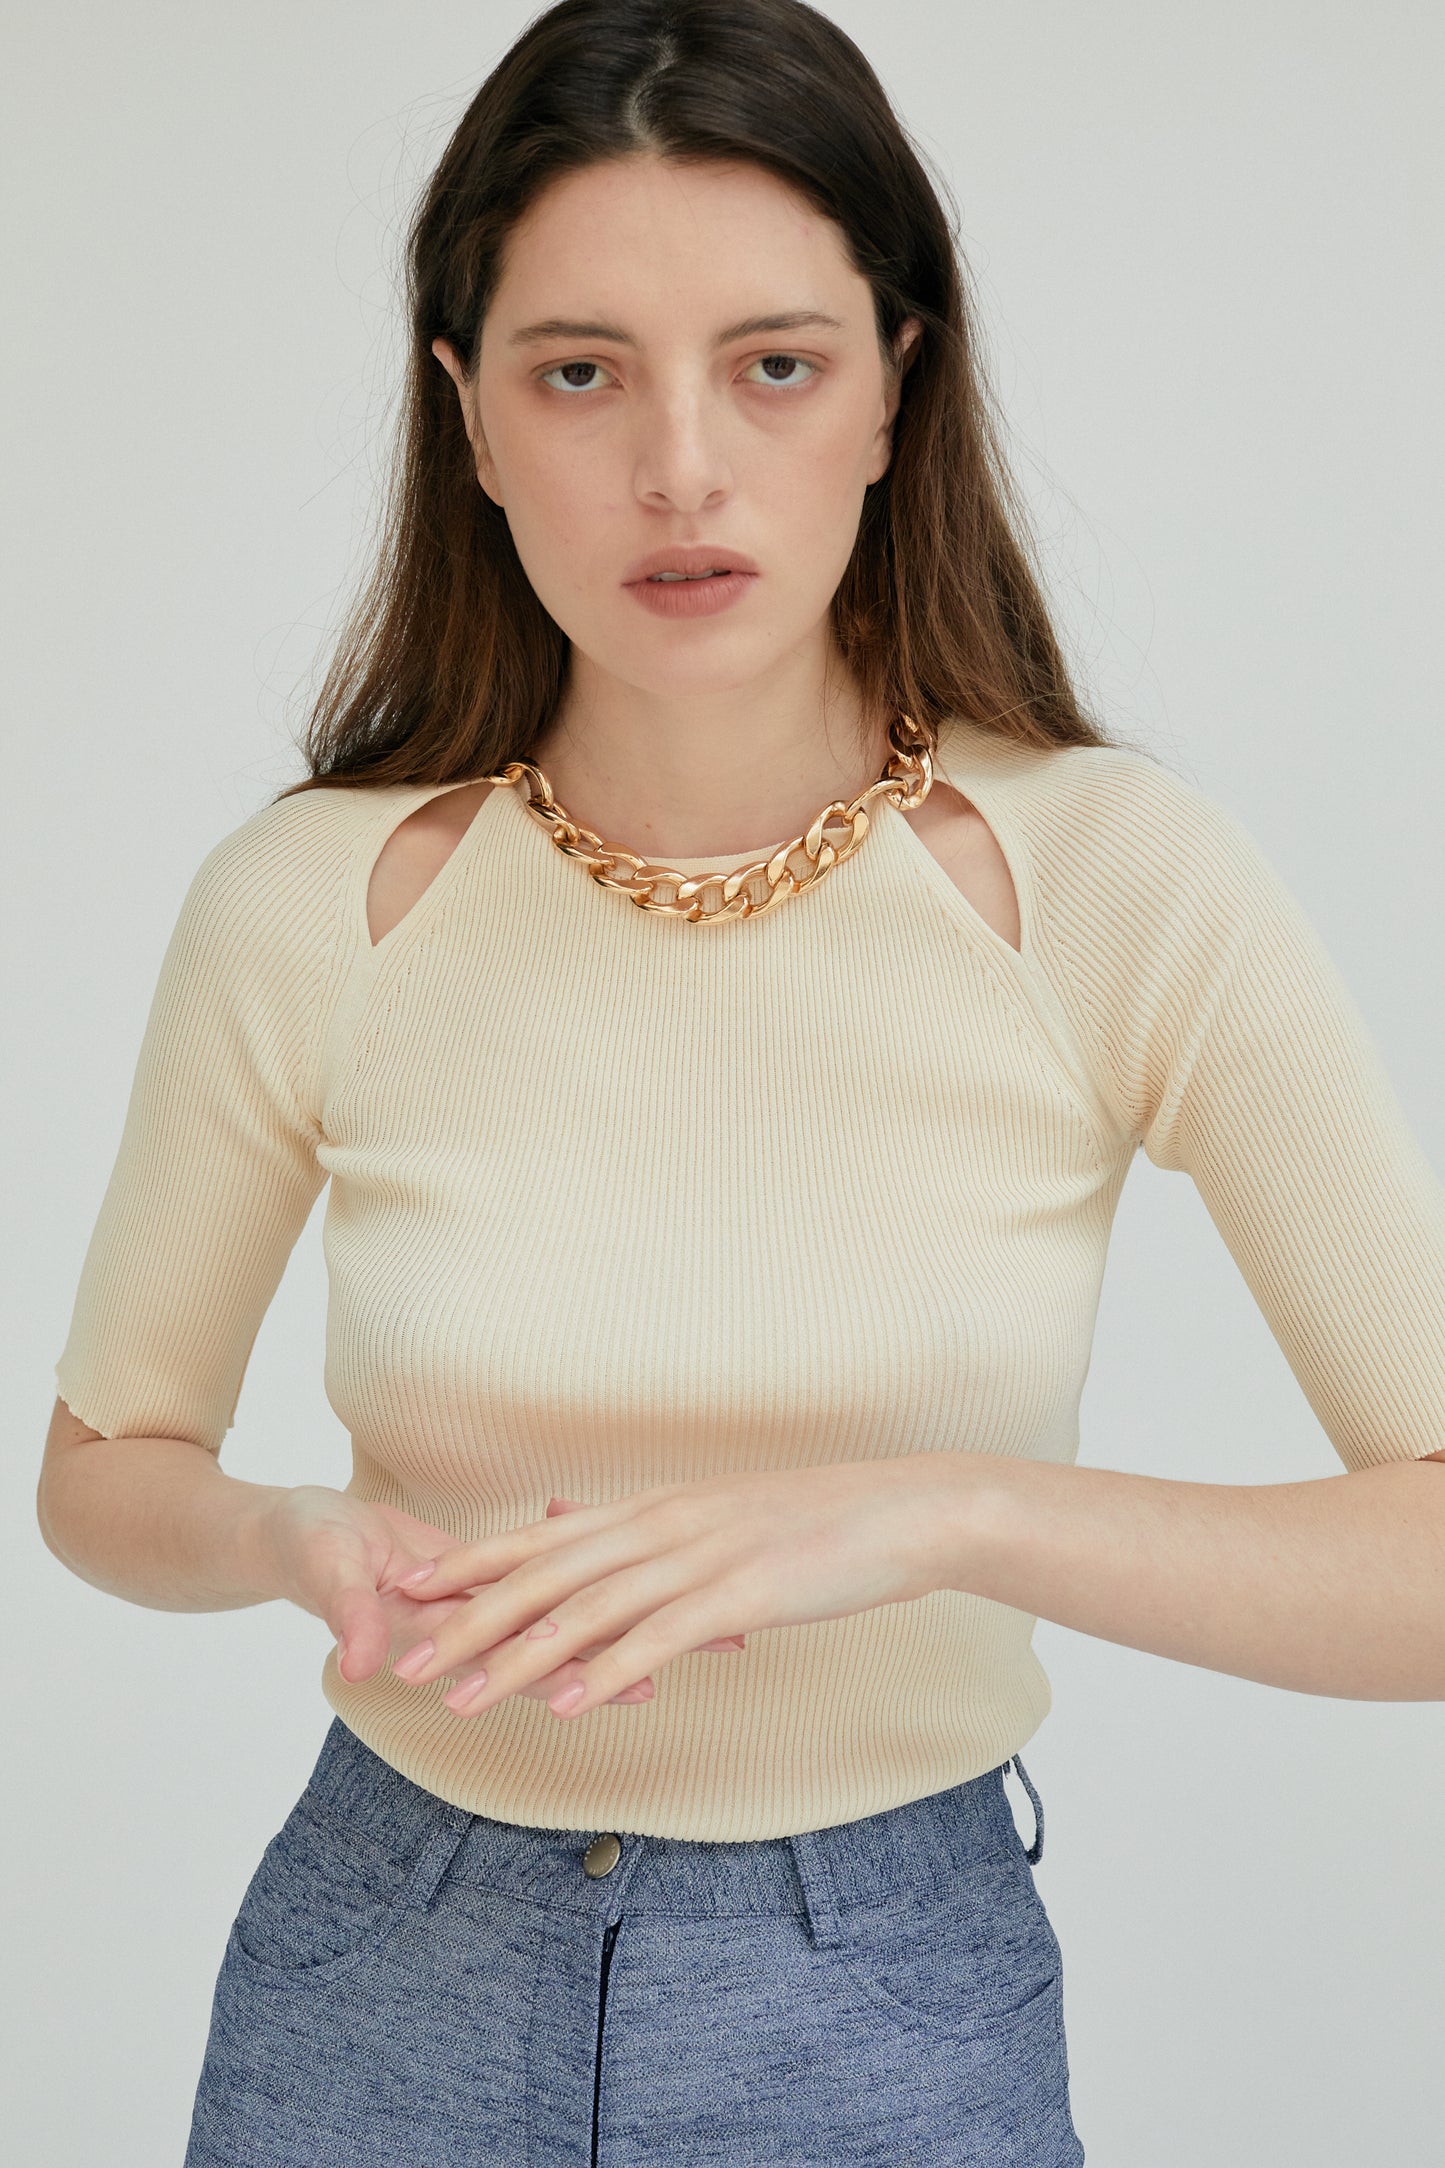 Ribbed Knit With Chain Necklace, Ivory